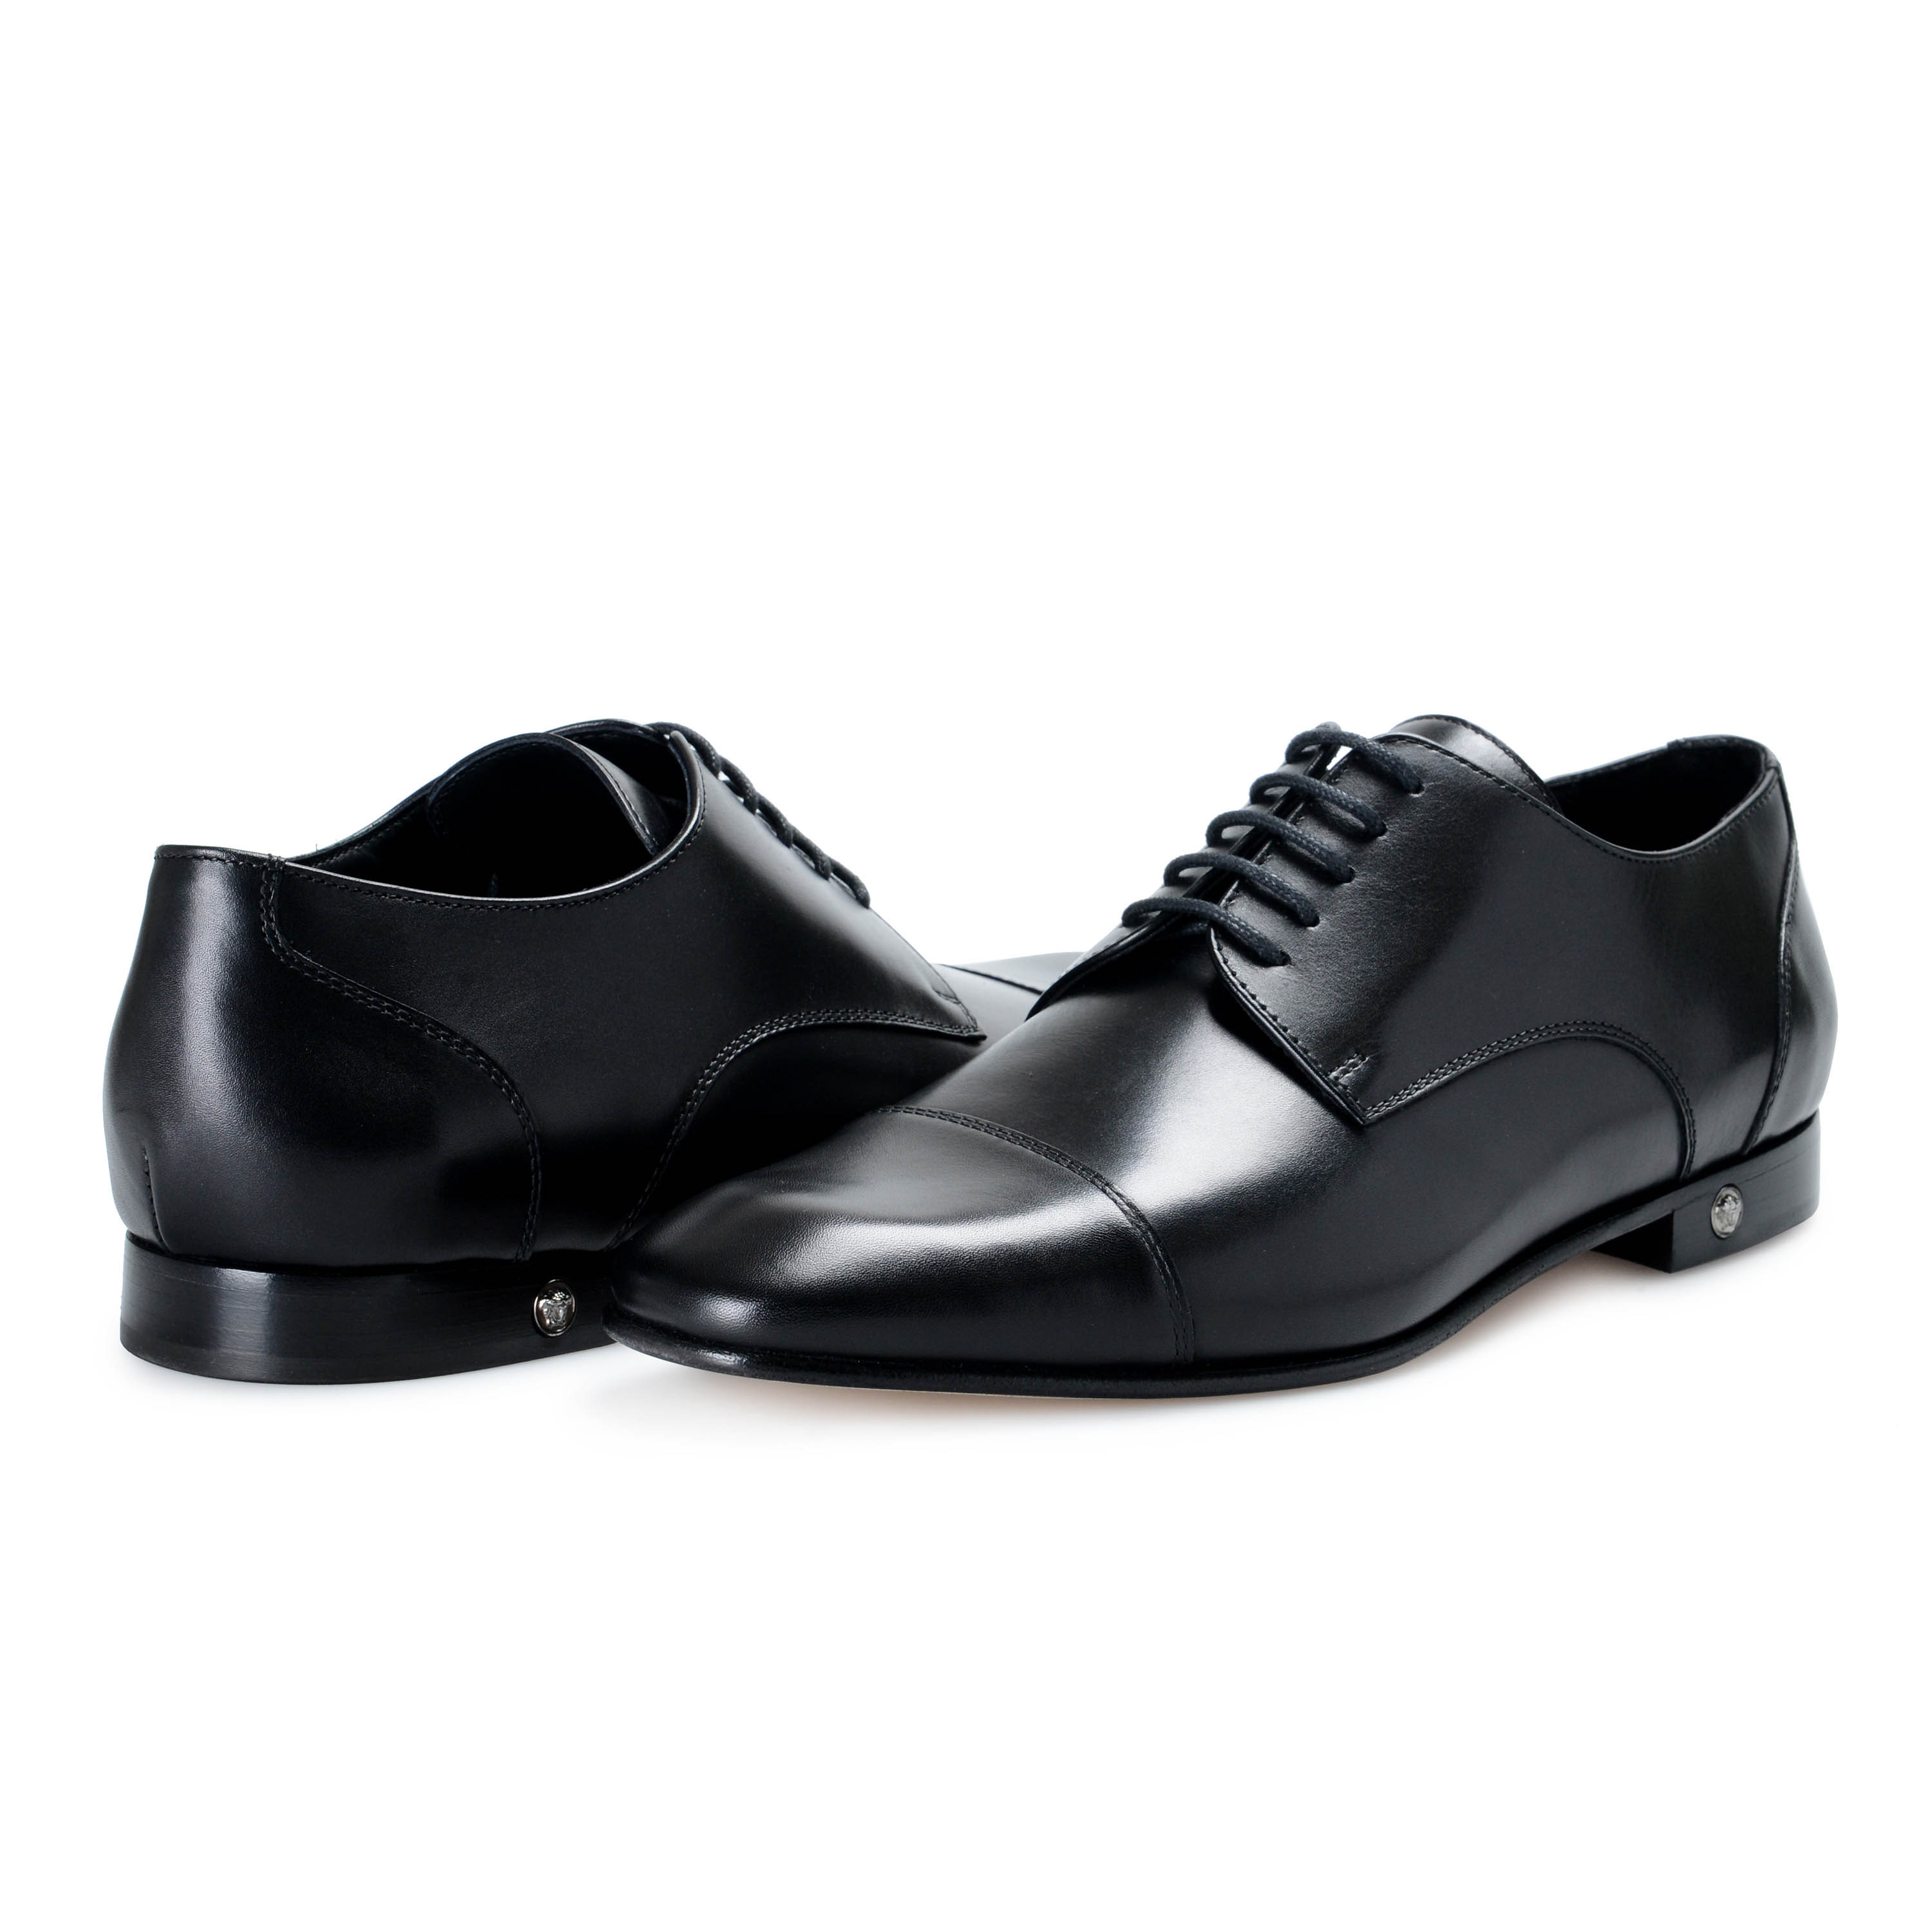 Men's Lace-Up Shoe In Black Leather